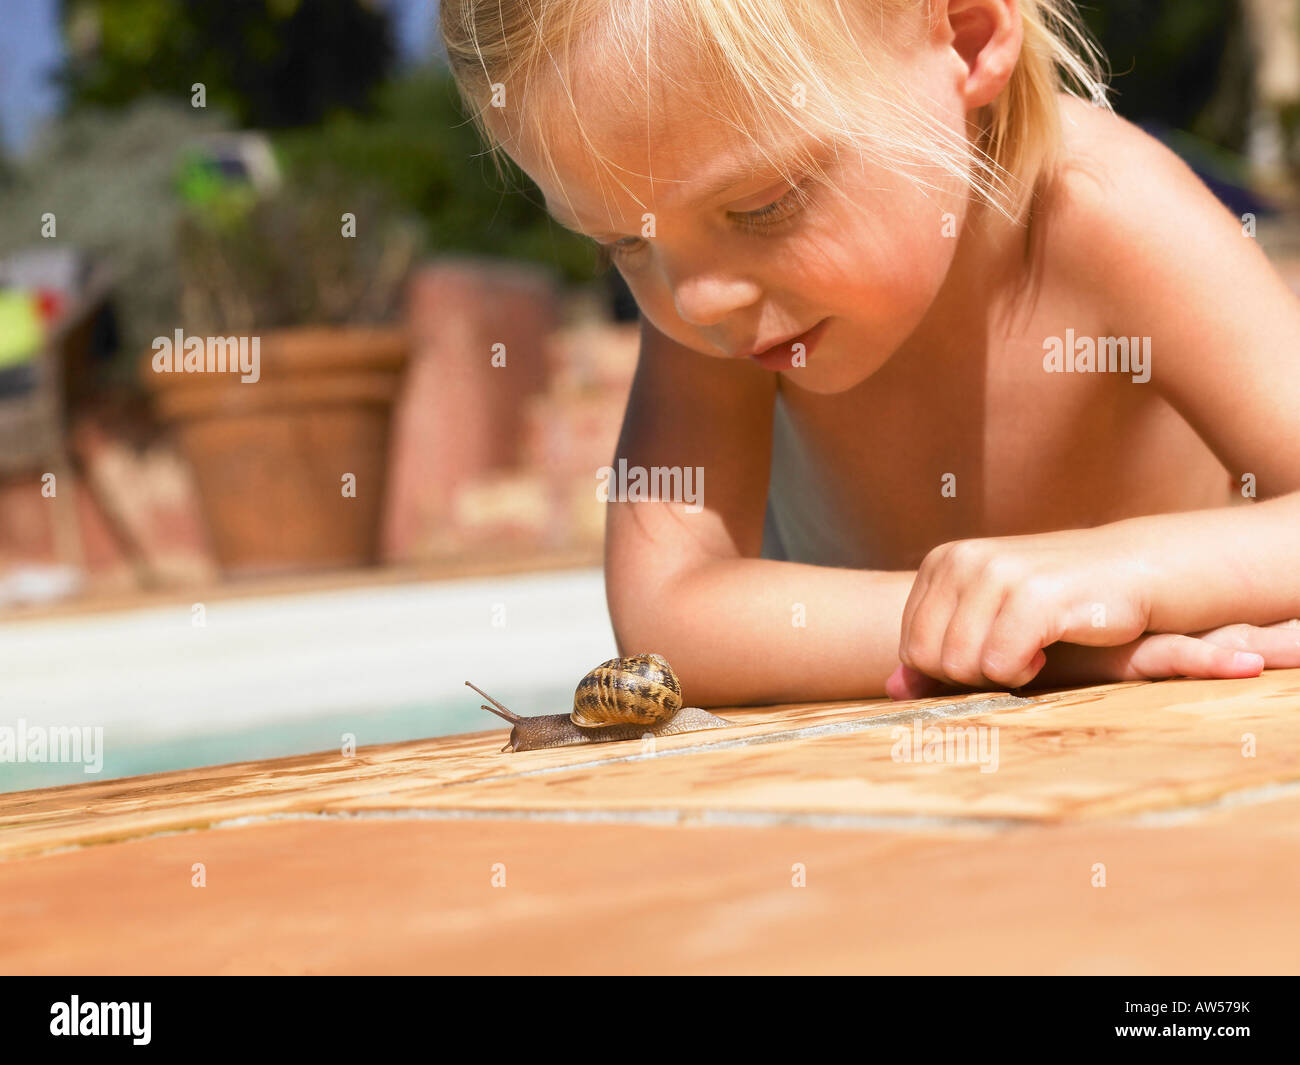 Little girl looking at a snail. Stock Photo